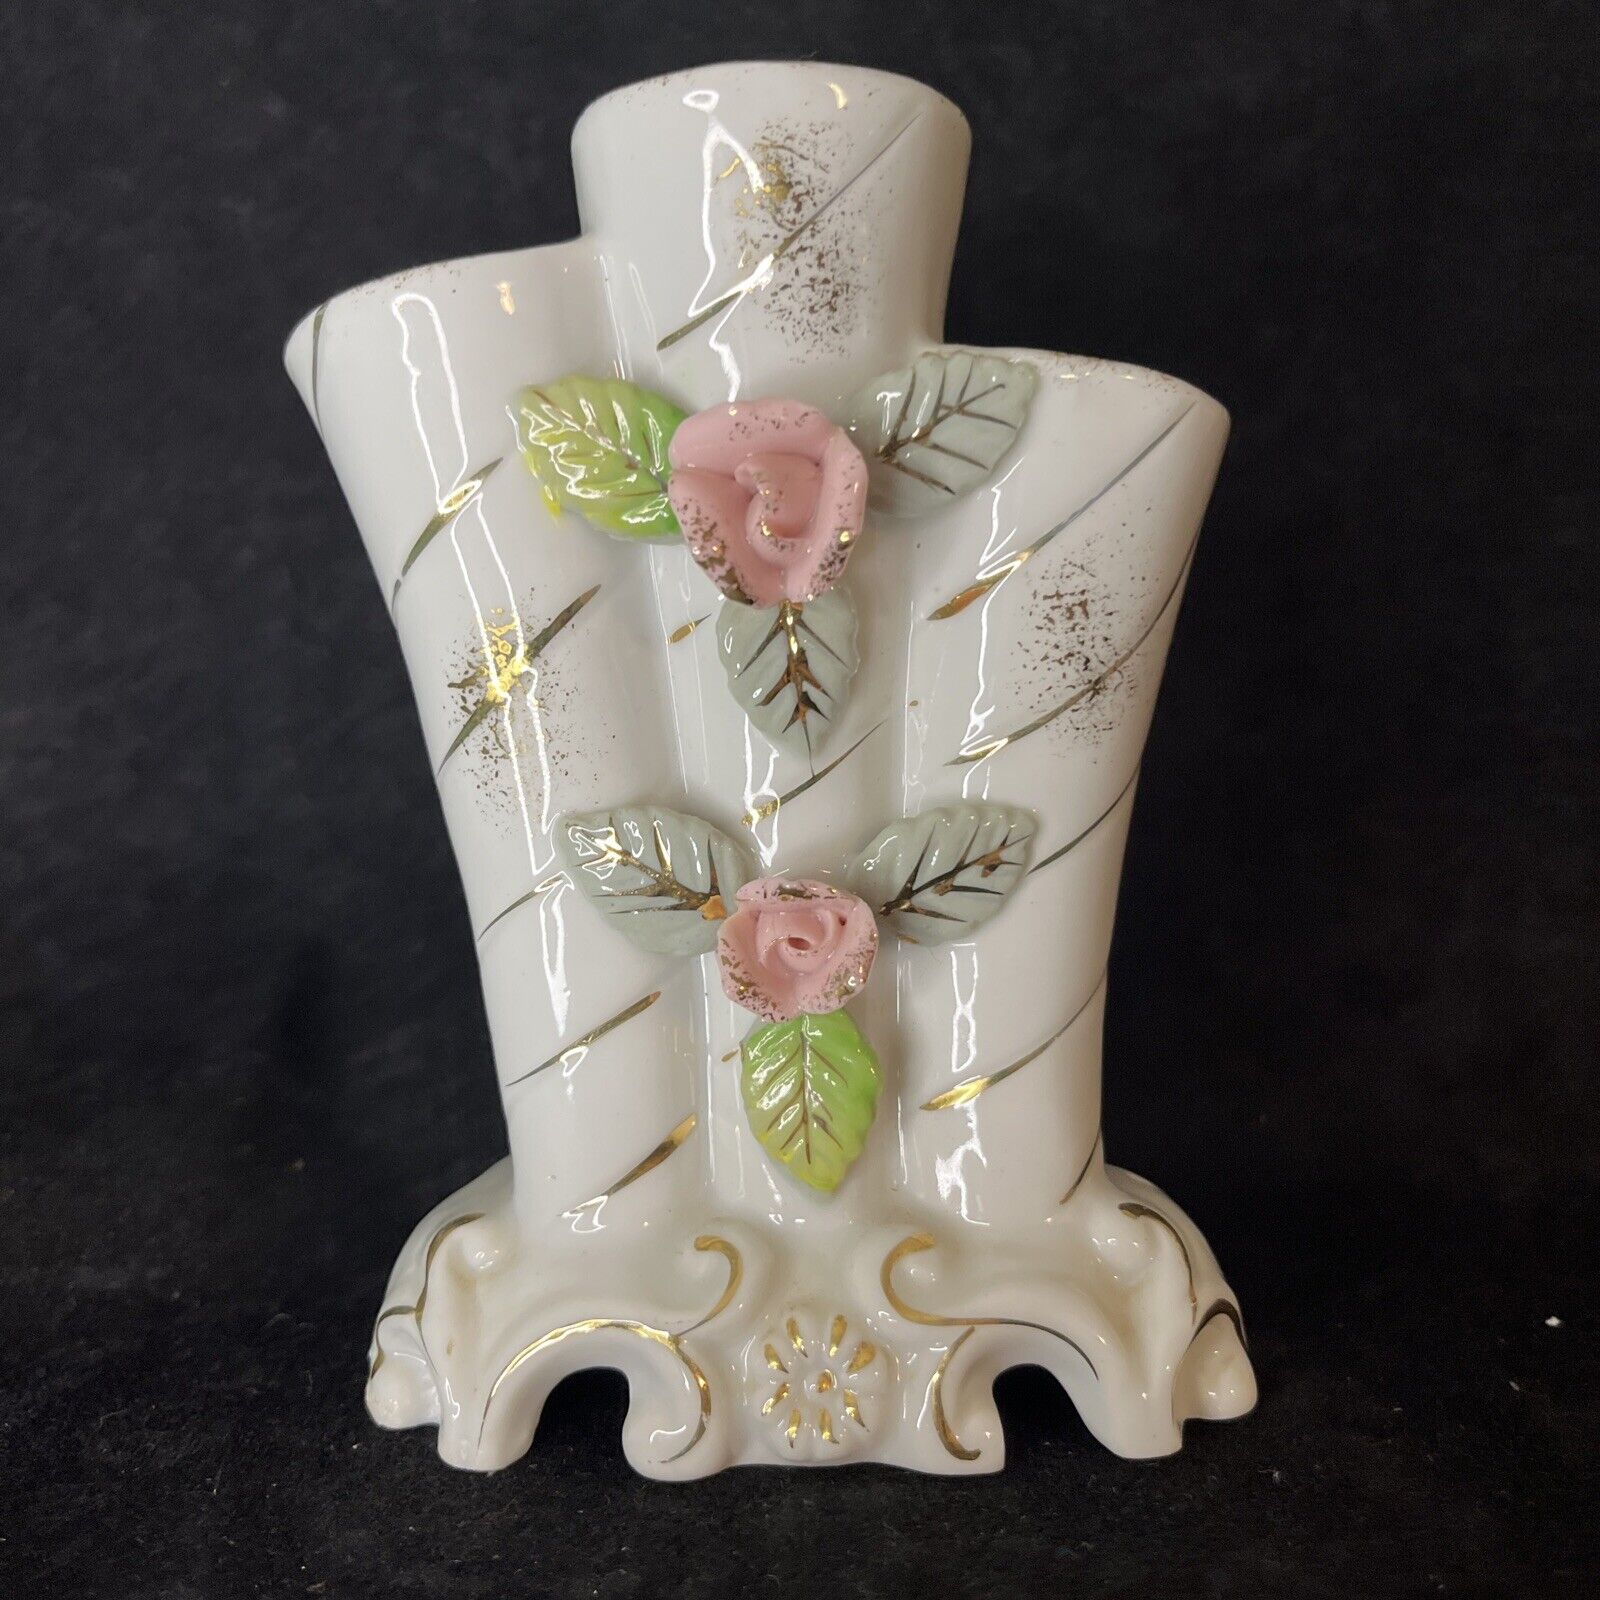 Vintage Porcelain Bud Vase With Roses 1950\'s Figurine Japan, 4.75 inches tall